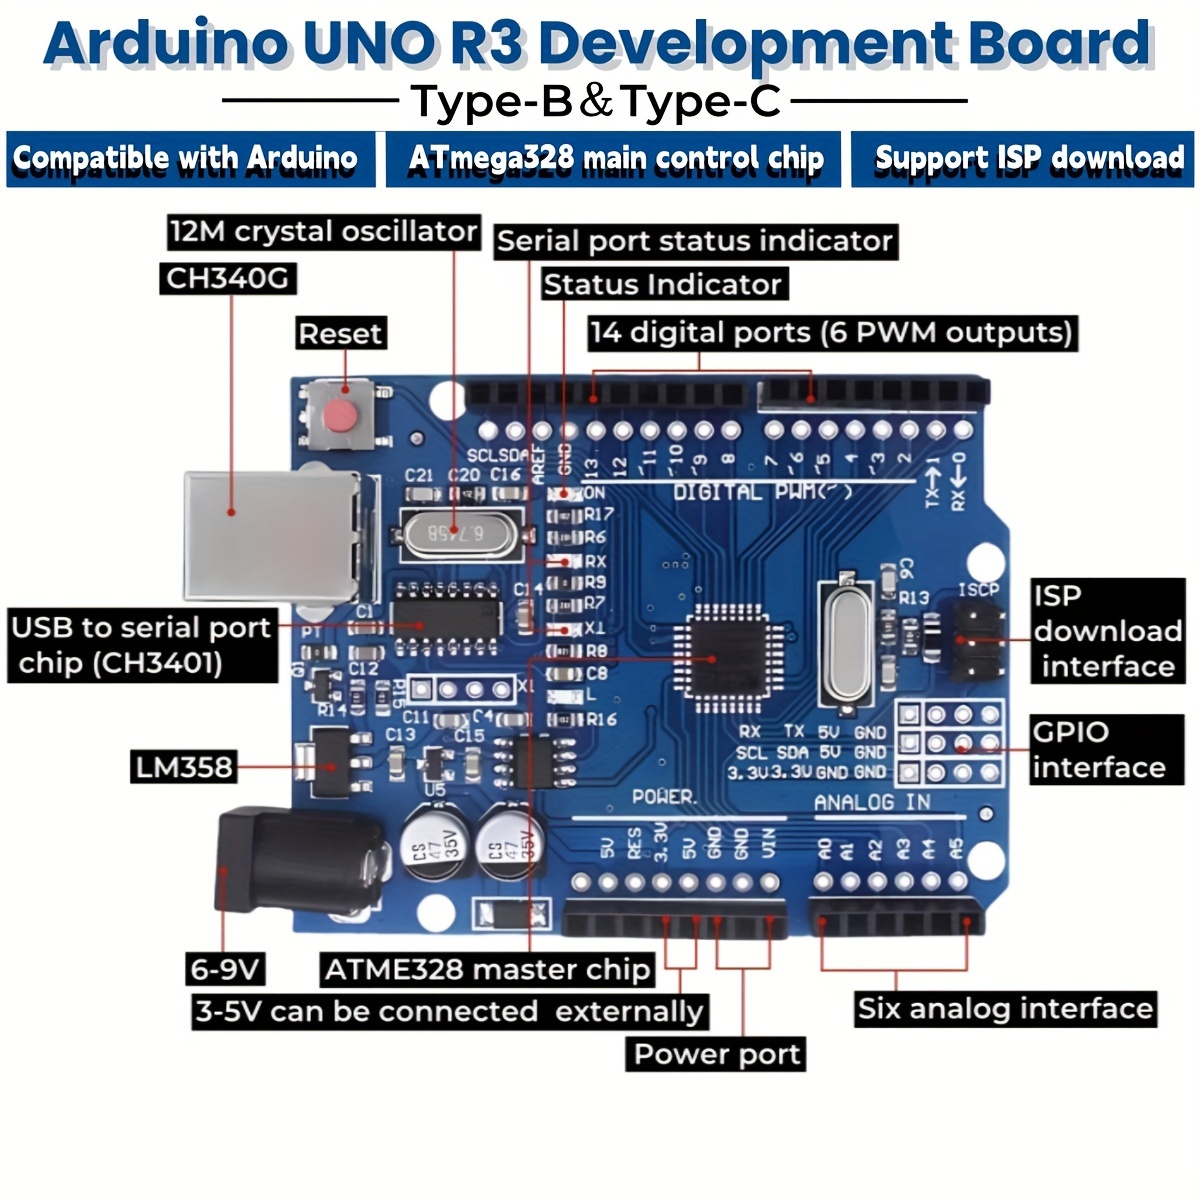 

Arduino Uno R3 Development Board - Atmega328p Compatible Microcontroller Module With 14 Digital I/o Pins, 6 Analog Inputs, Usb & Power Socket For Electronic Projects And Programming Experiments - 1pc